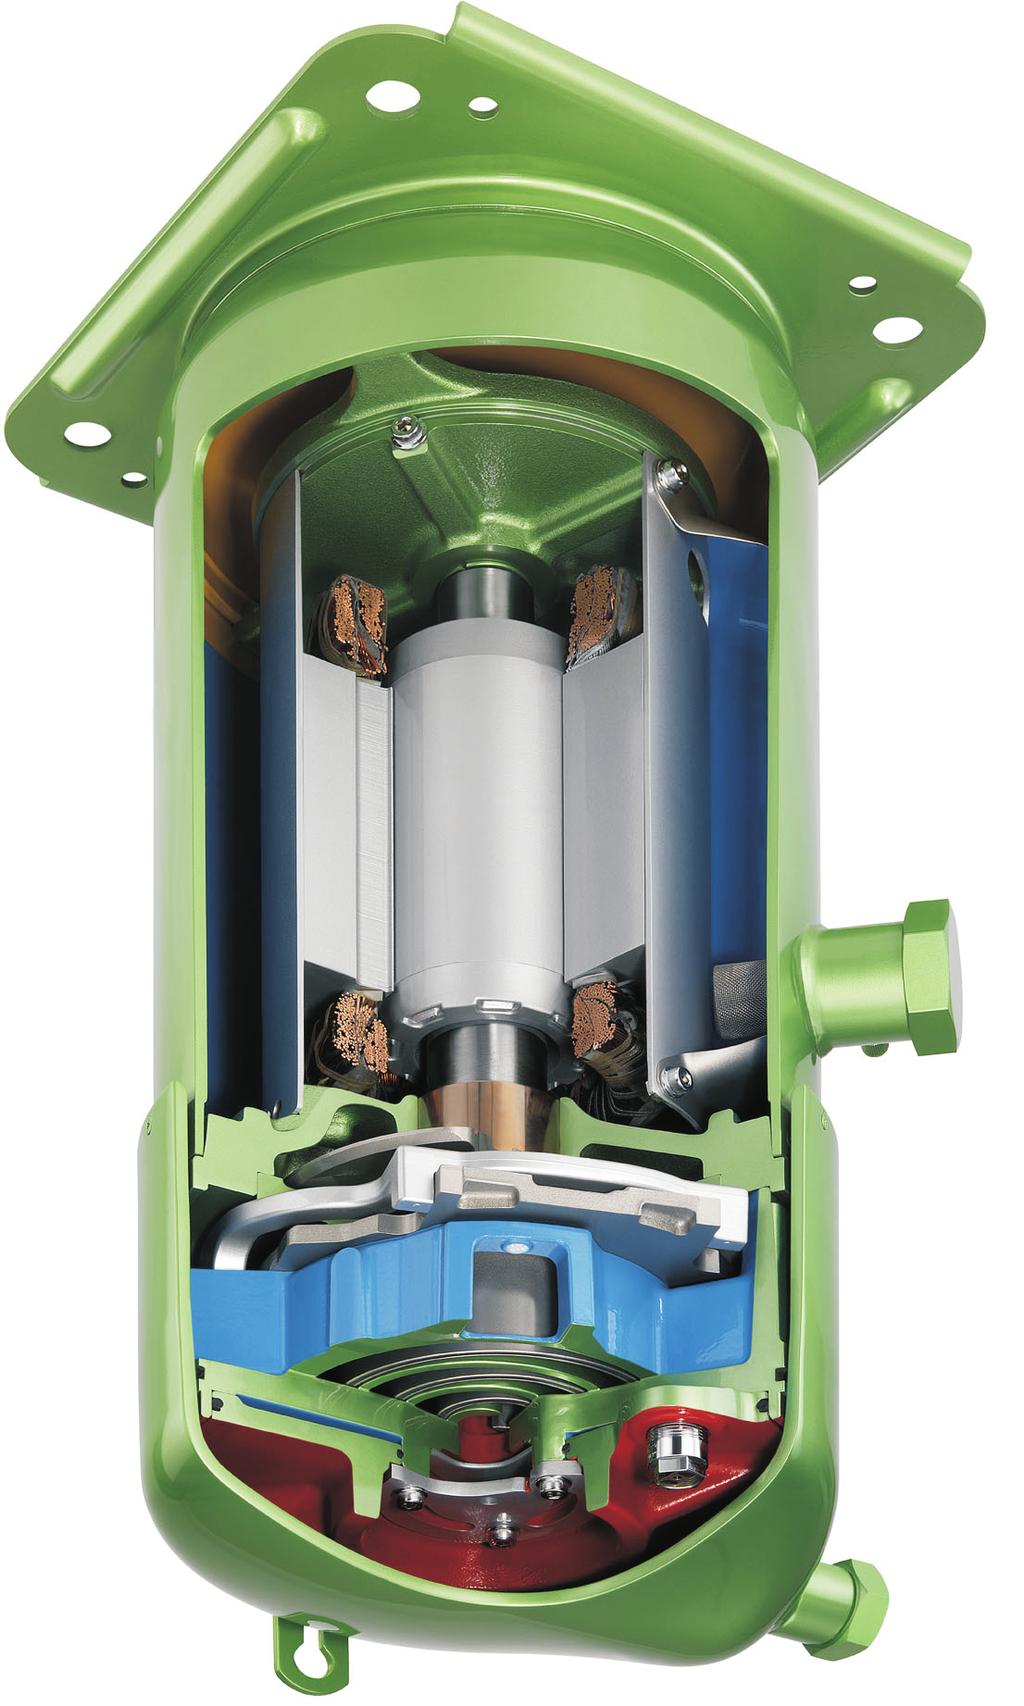 ORBIT for variable speed drive (VSD) While the scroll compressors of the ORBIT series are characterized by high full load and seasonal efficiency, low sound levels, and high reliability, they are